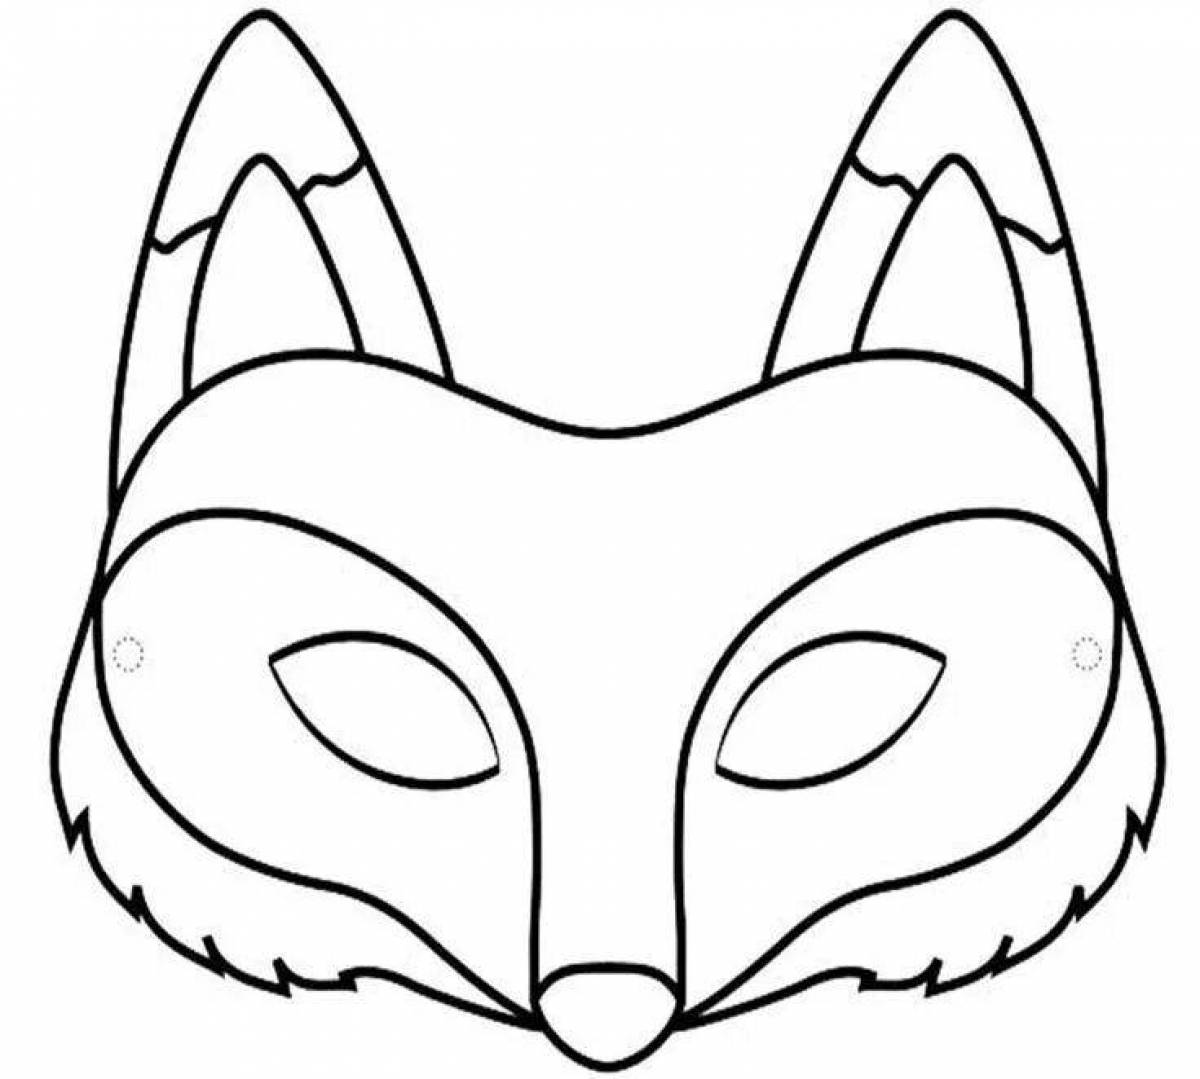 Amazing masks coloring book for kids